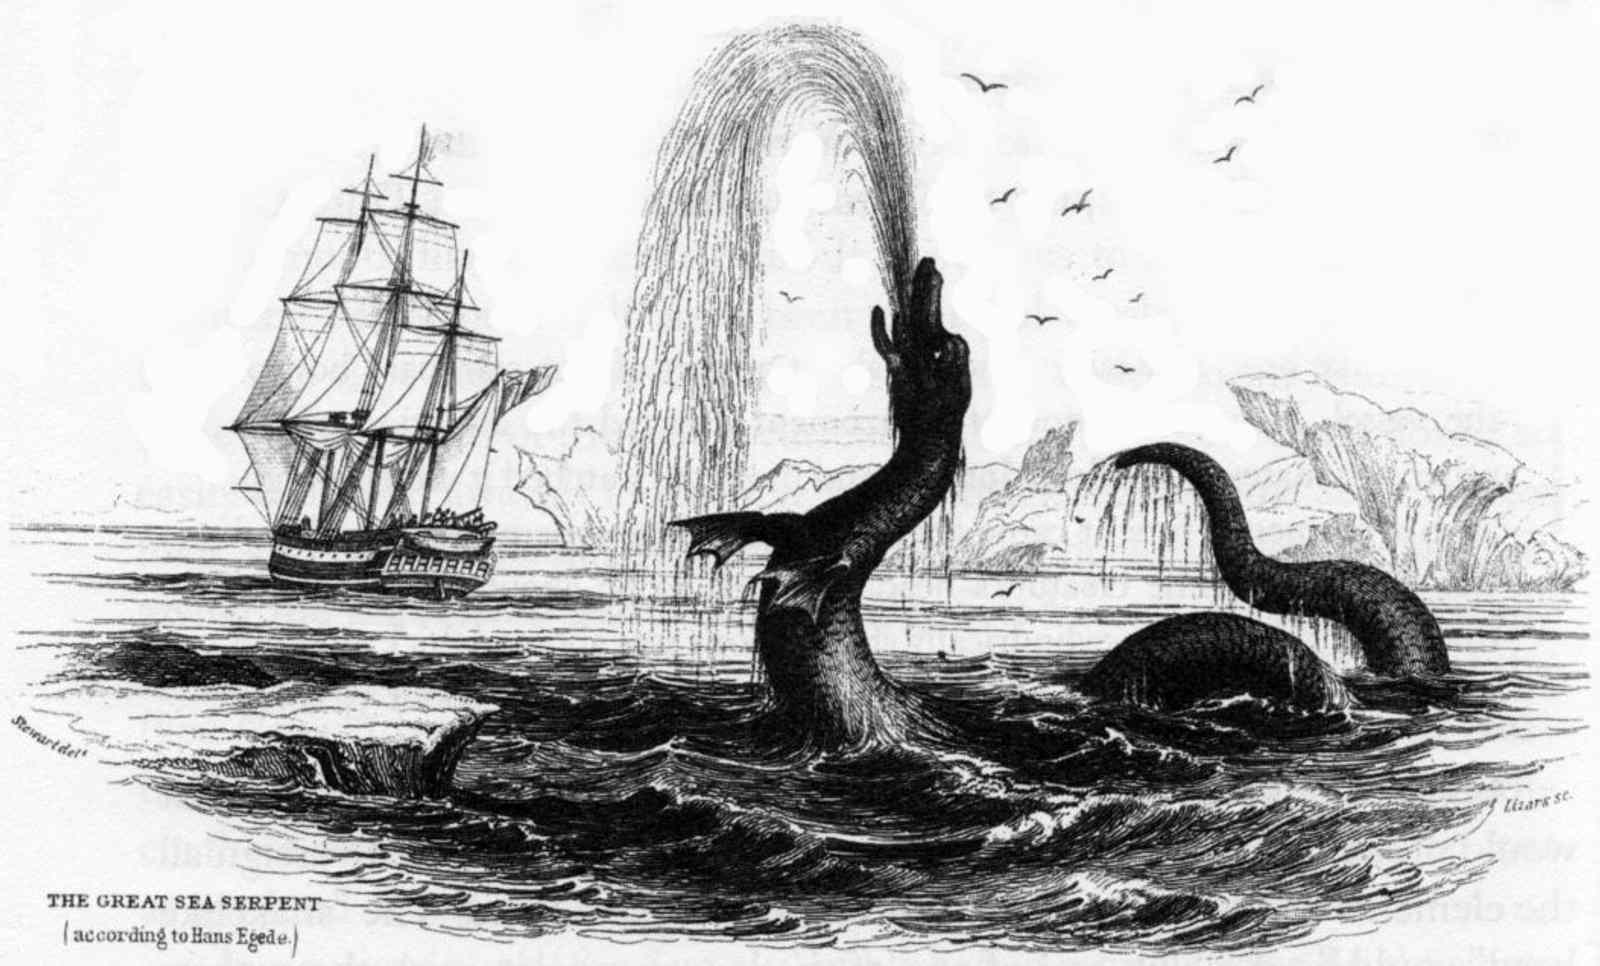 An black and white drawing of a serpent spitting a fountain of water several metres high. The massive black serpent is in the foreground, while a ship approaches from behind